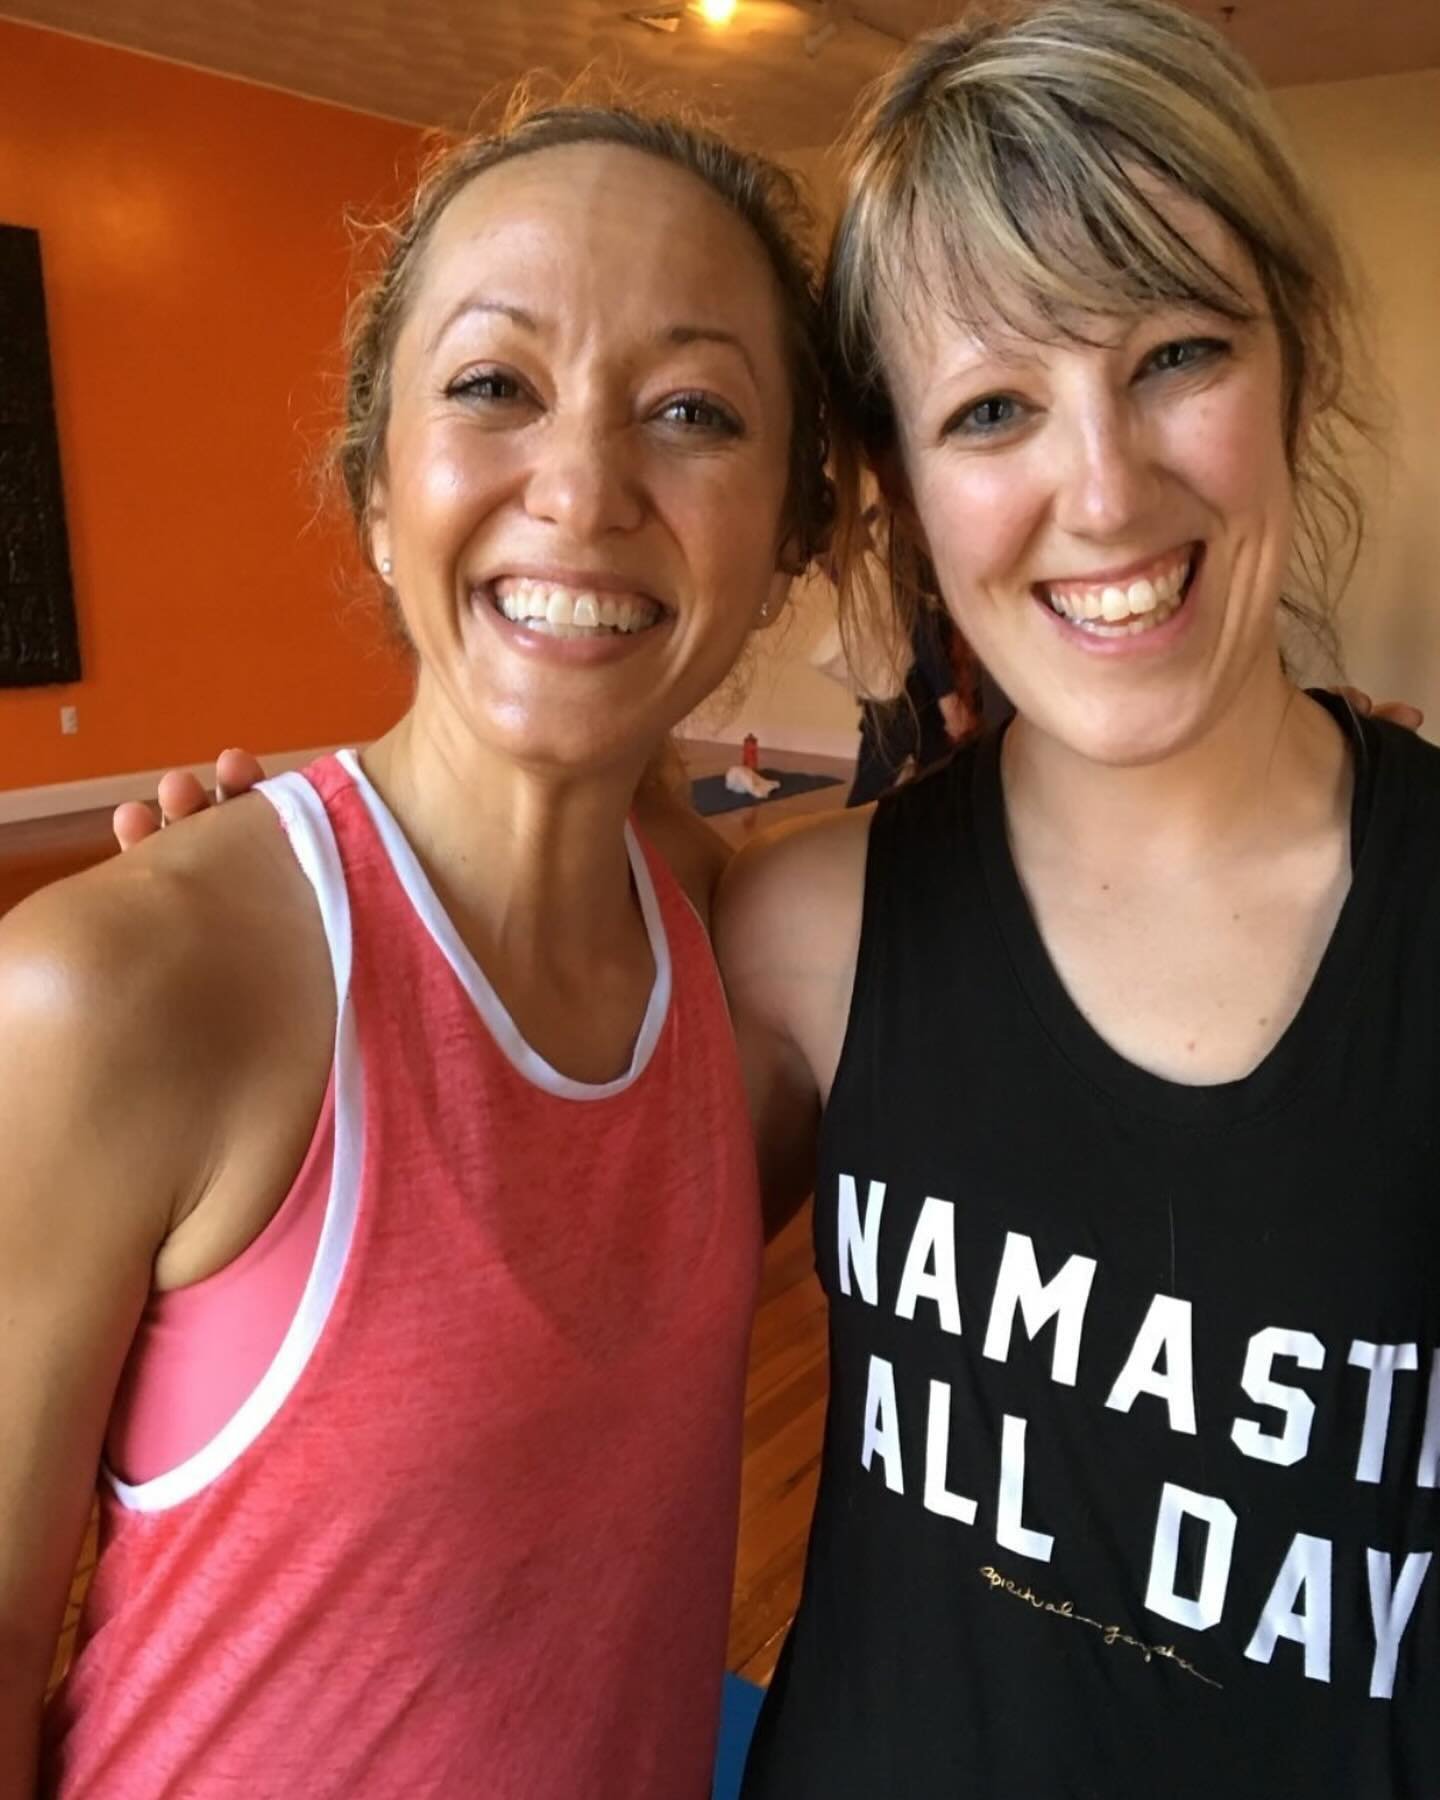 &ldquo;I&rsquo;ve practiced with Kino in New York, Seattle, Tulum, &amp; Boston! While my yoga practice looks a bit different these days (a weekly complement to running and lifting), I&rsquo;m looking forward to getting on my mat and learning more fr